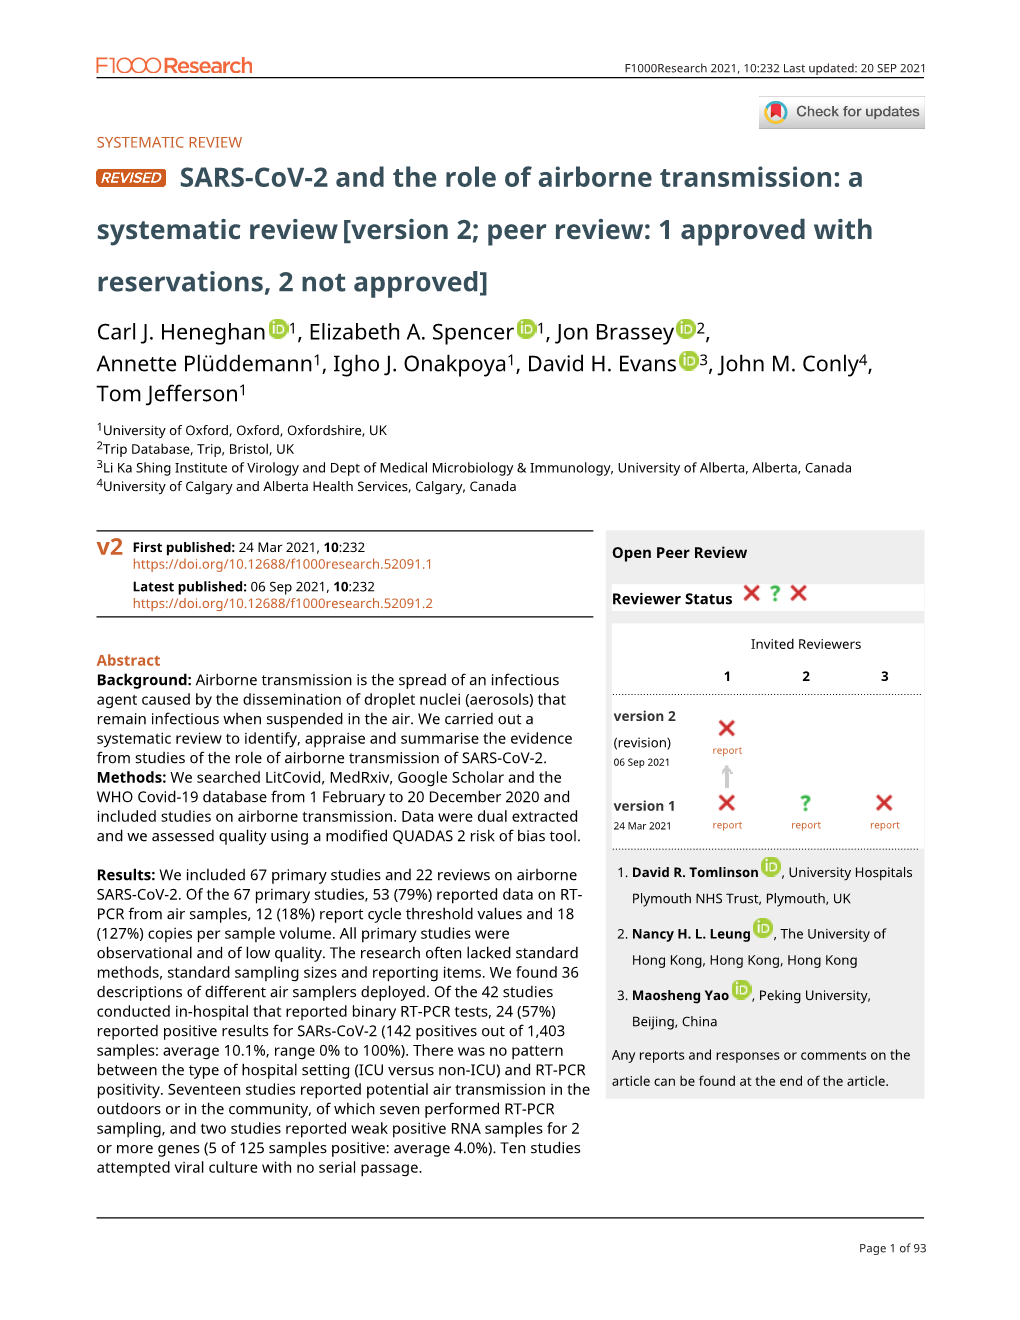 SARS-Cov-2 and the Role of Airborne Transmission: a Systematic Review [Version 2; Peer Review: 1 Approved with Reservations, 2 Not Approved]